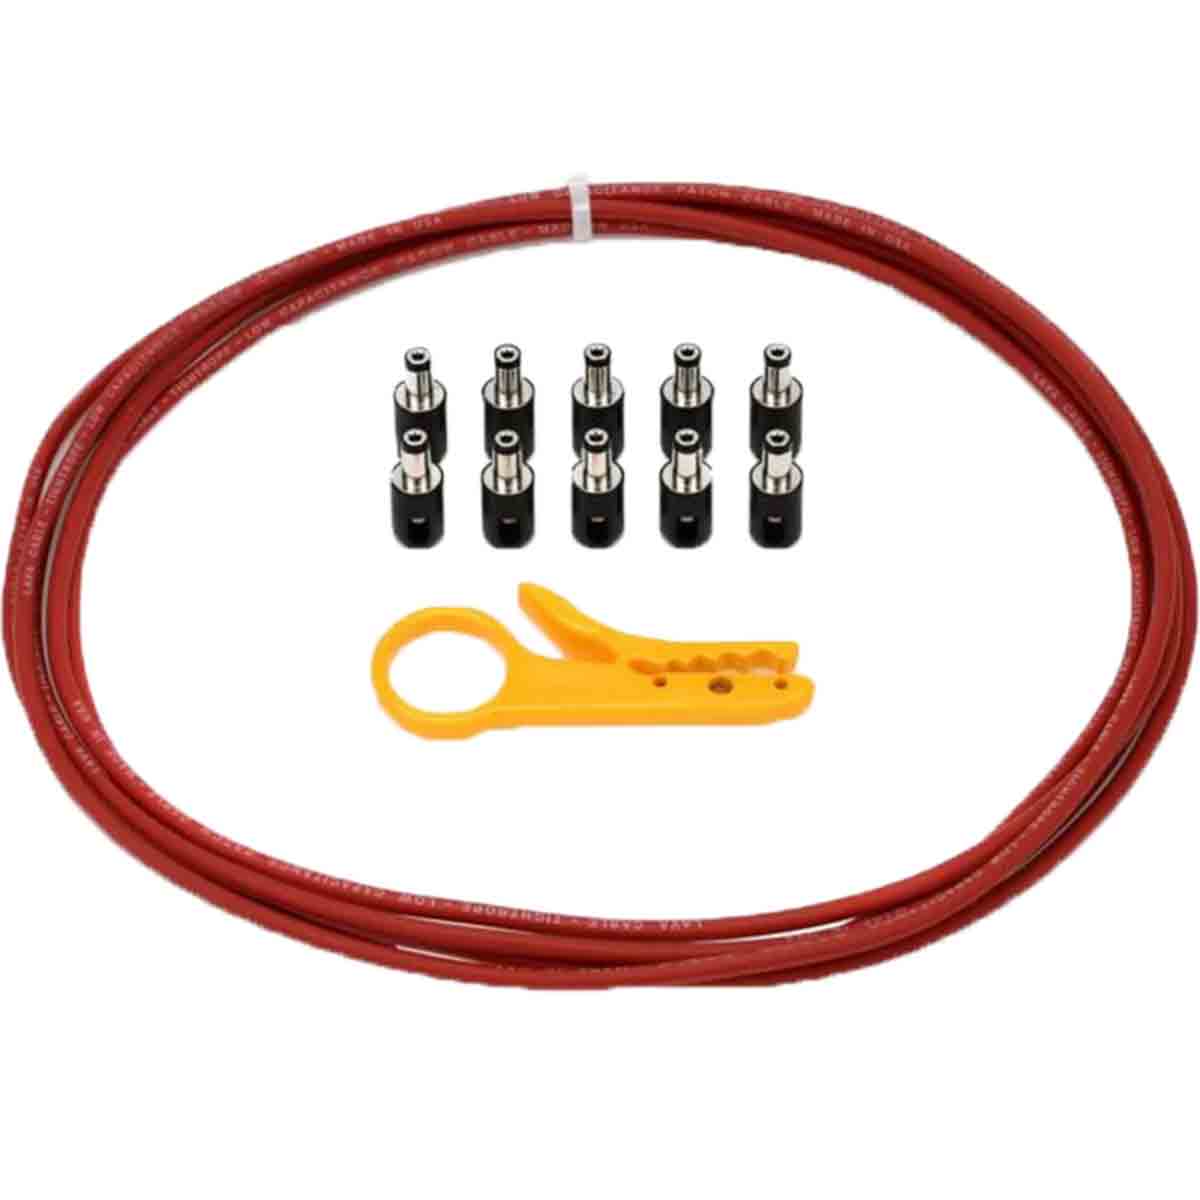 Lava Cable Tightrope DC Cable Kit Red w/ 10-DC Plugs & Stripper